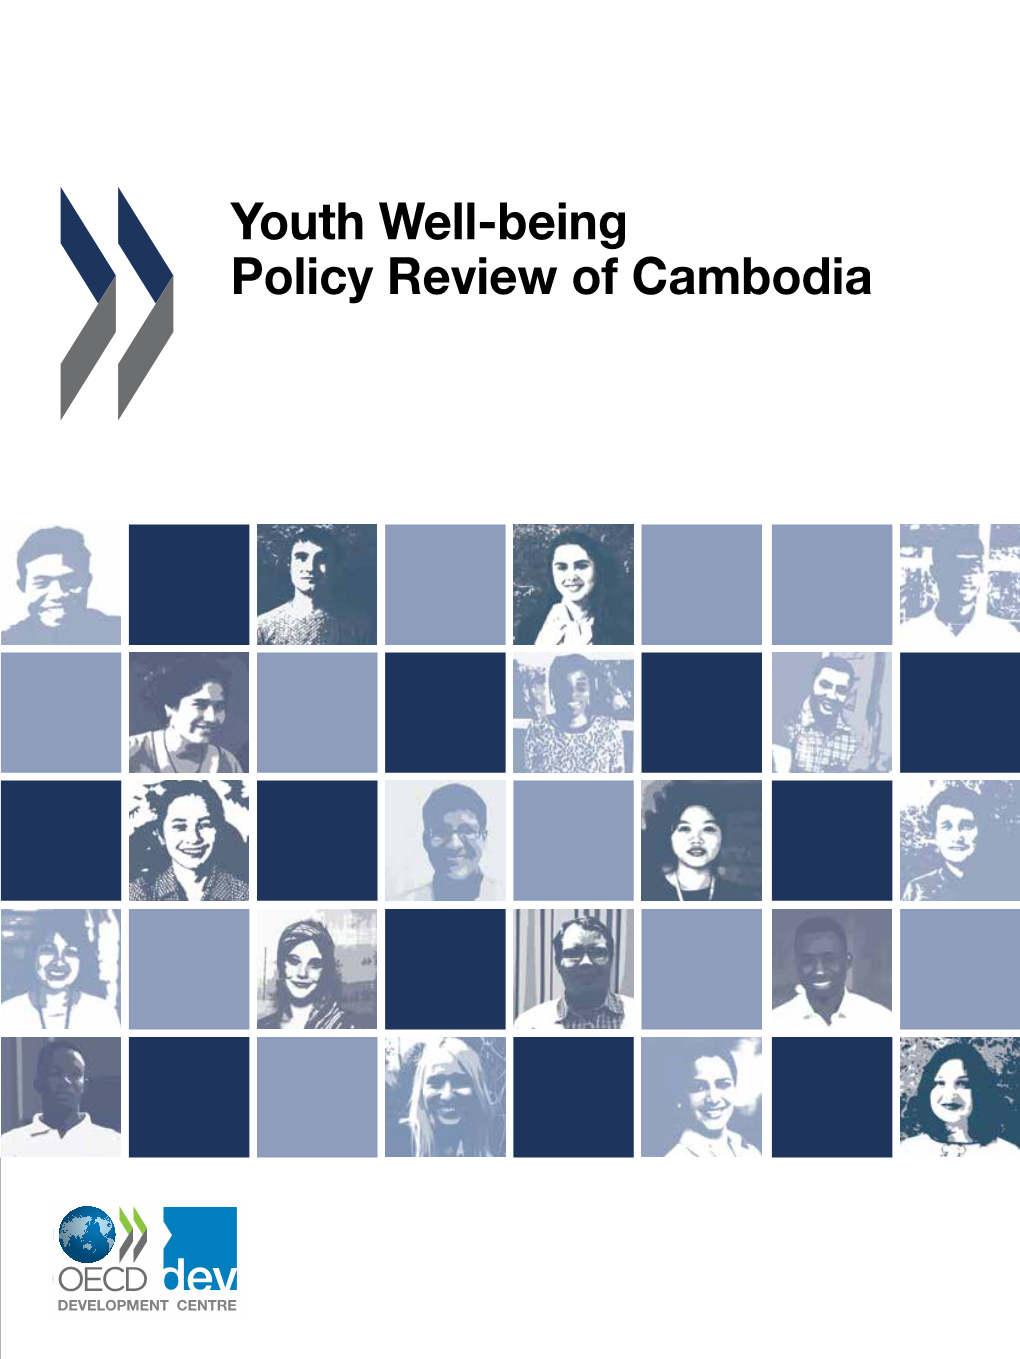 Youth Well-Being Policy Review of Cambodia © OECD 2017